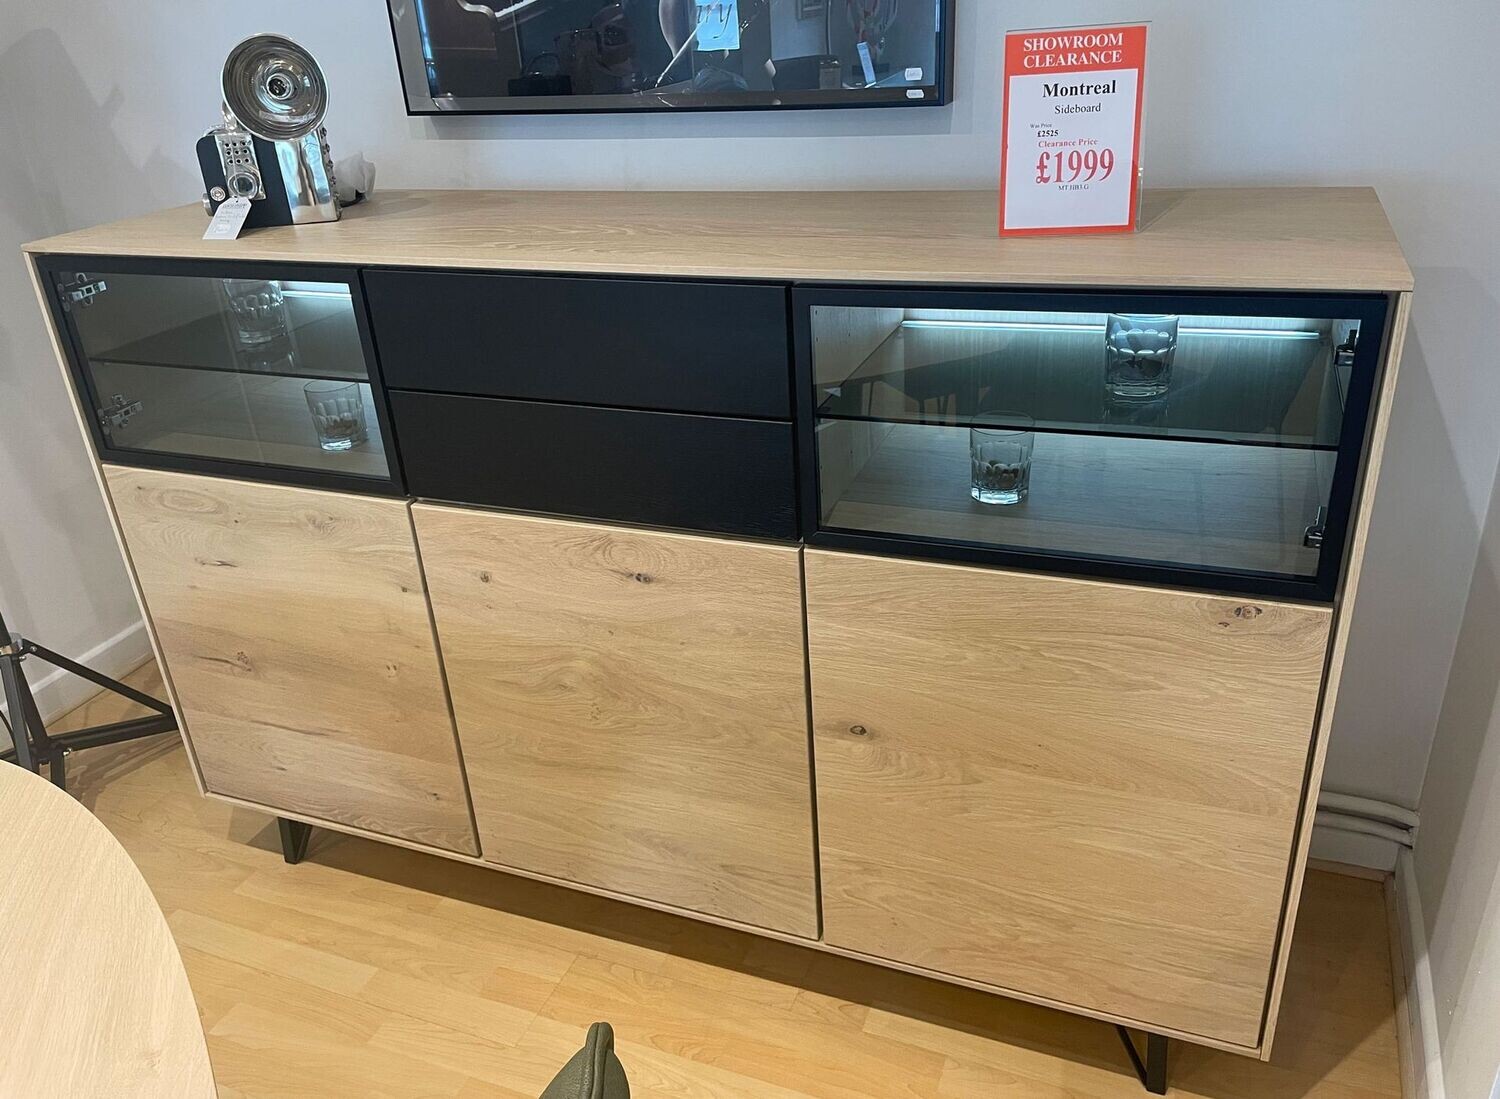 ​ CLEARANCE MTE Montreal Sideboard
WAS £2525 CLEARANCE £1999 NOW £1495